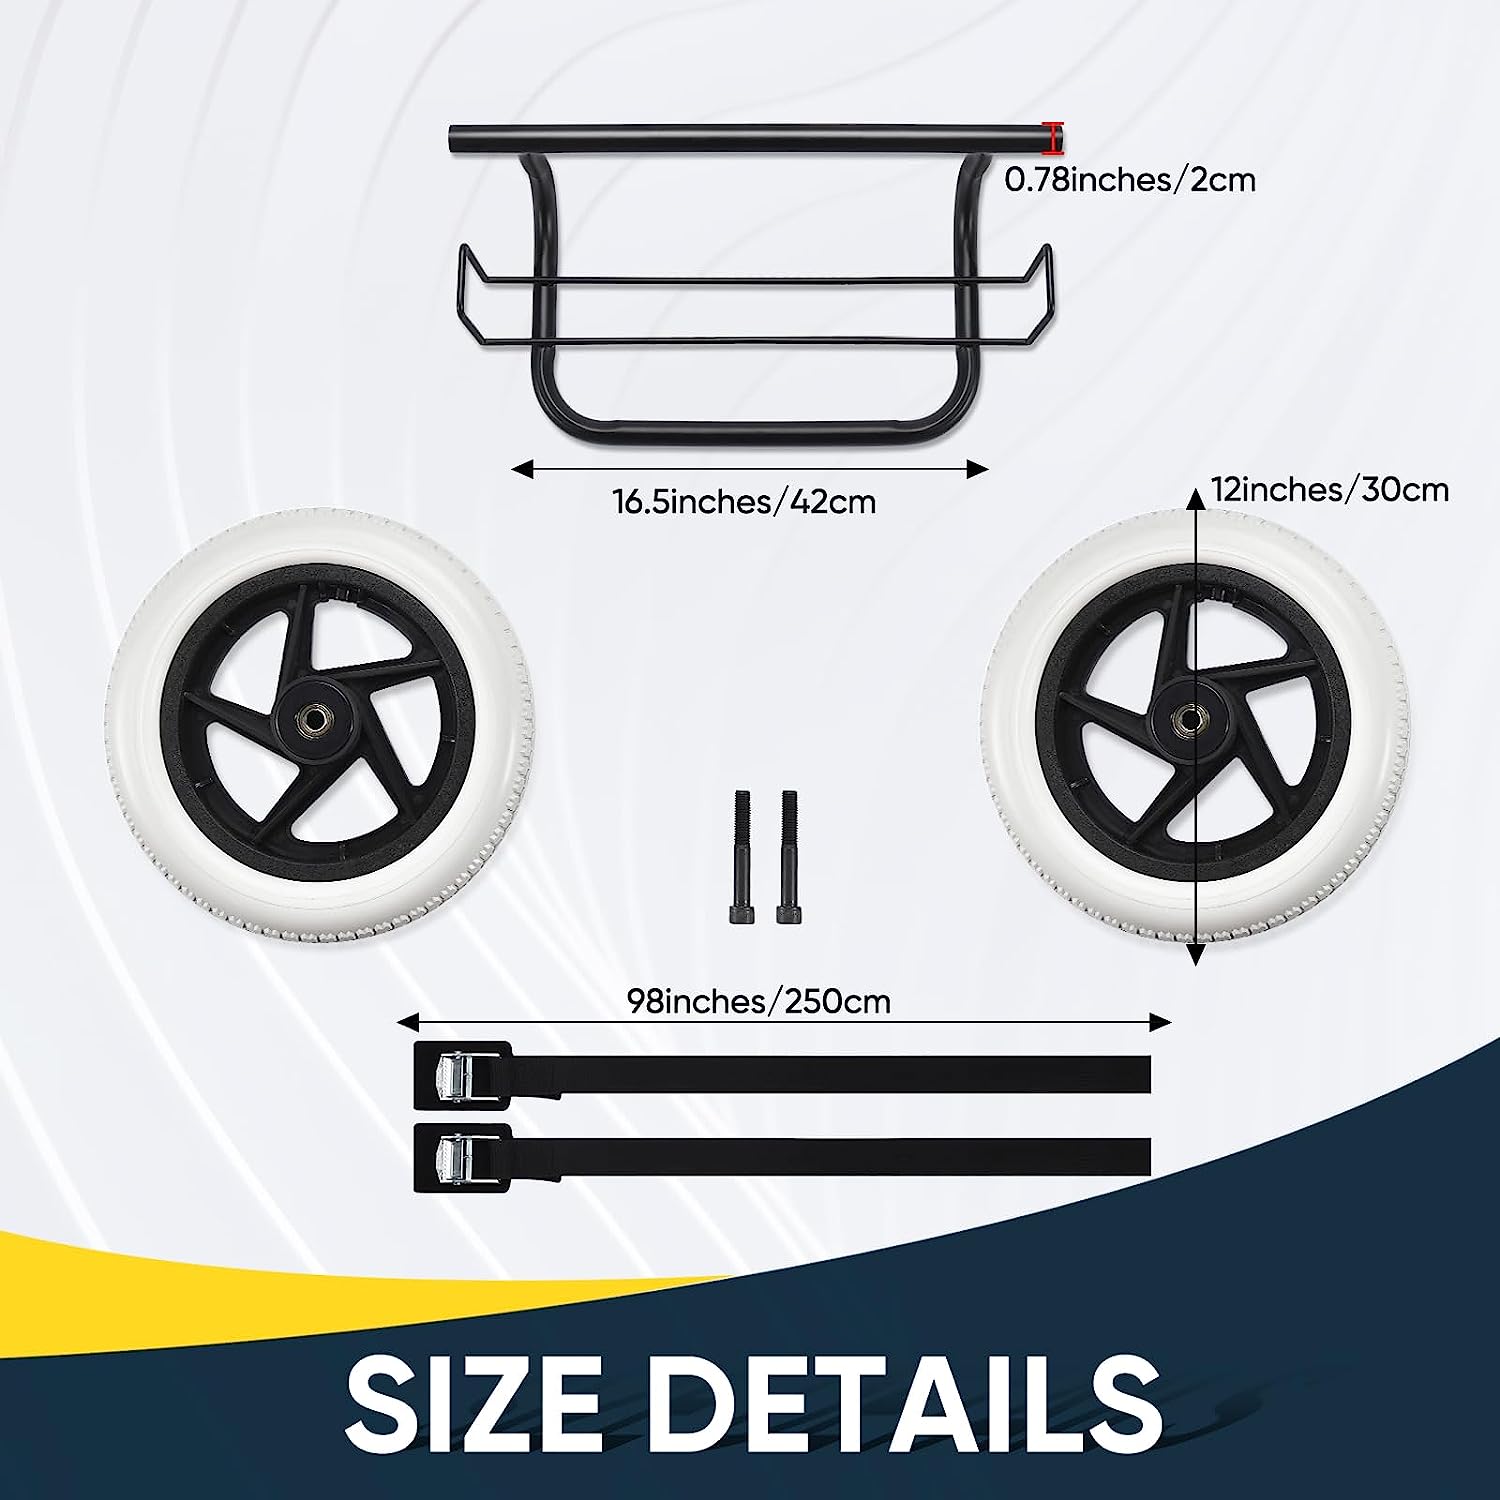 Cooler Cart Kit, Cooler Wheel Kit Includes 12-Inch Cooler Wheels, Universal Heavy Duty Wheels for Cooler Camping Cooler Accessories for Camping & Beach, 17 Inches Coolers